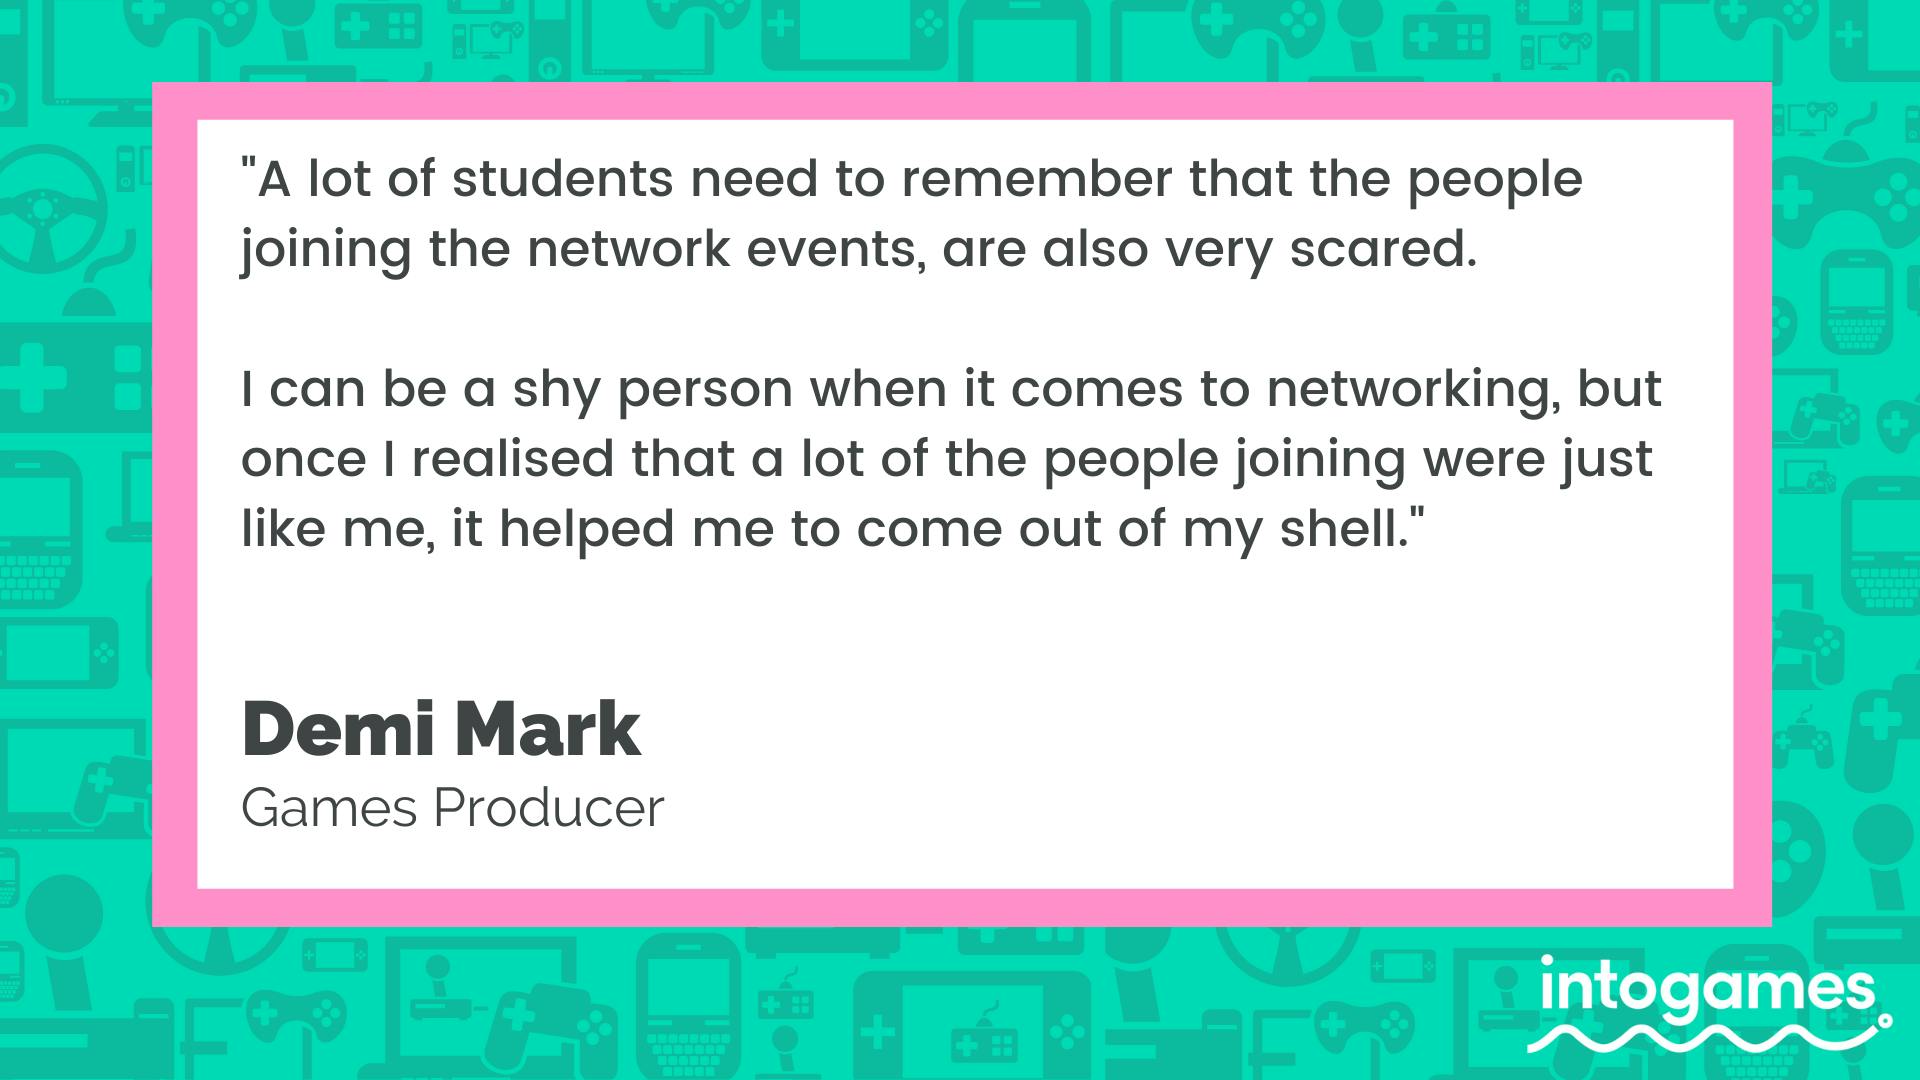 "A lot of students need to remember that the people joining the network events are also very scared. I can be a shy person when it comes to networking, but once I realised that a lot of the people joining were just like me, it helped me come out of my shell." - Demi Mark, Games Producer.